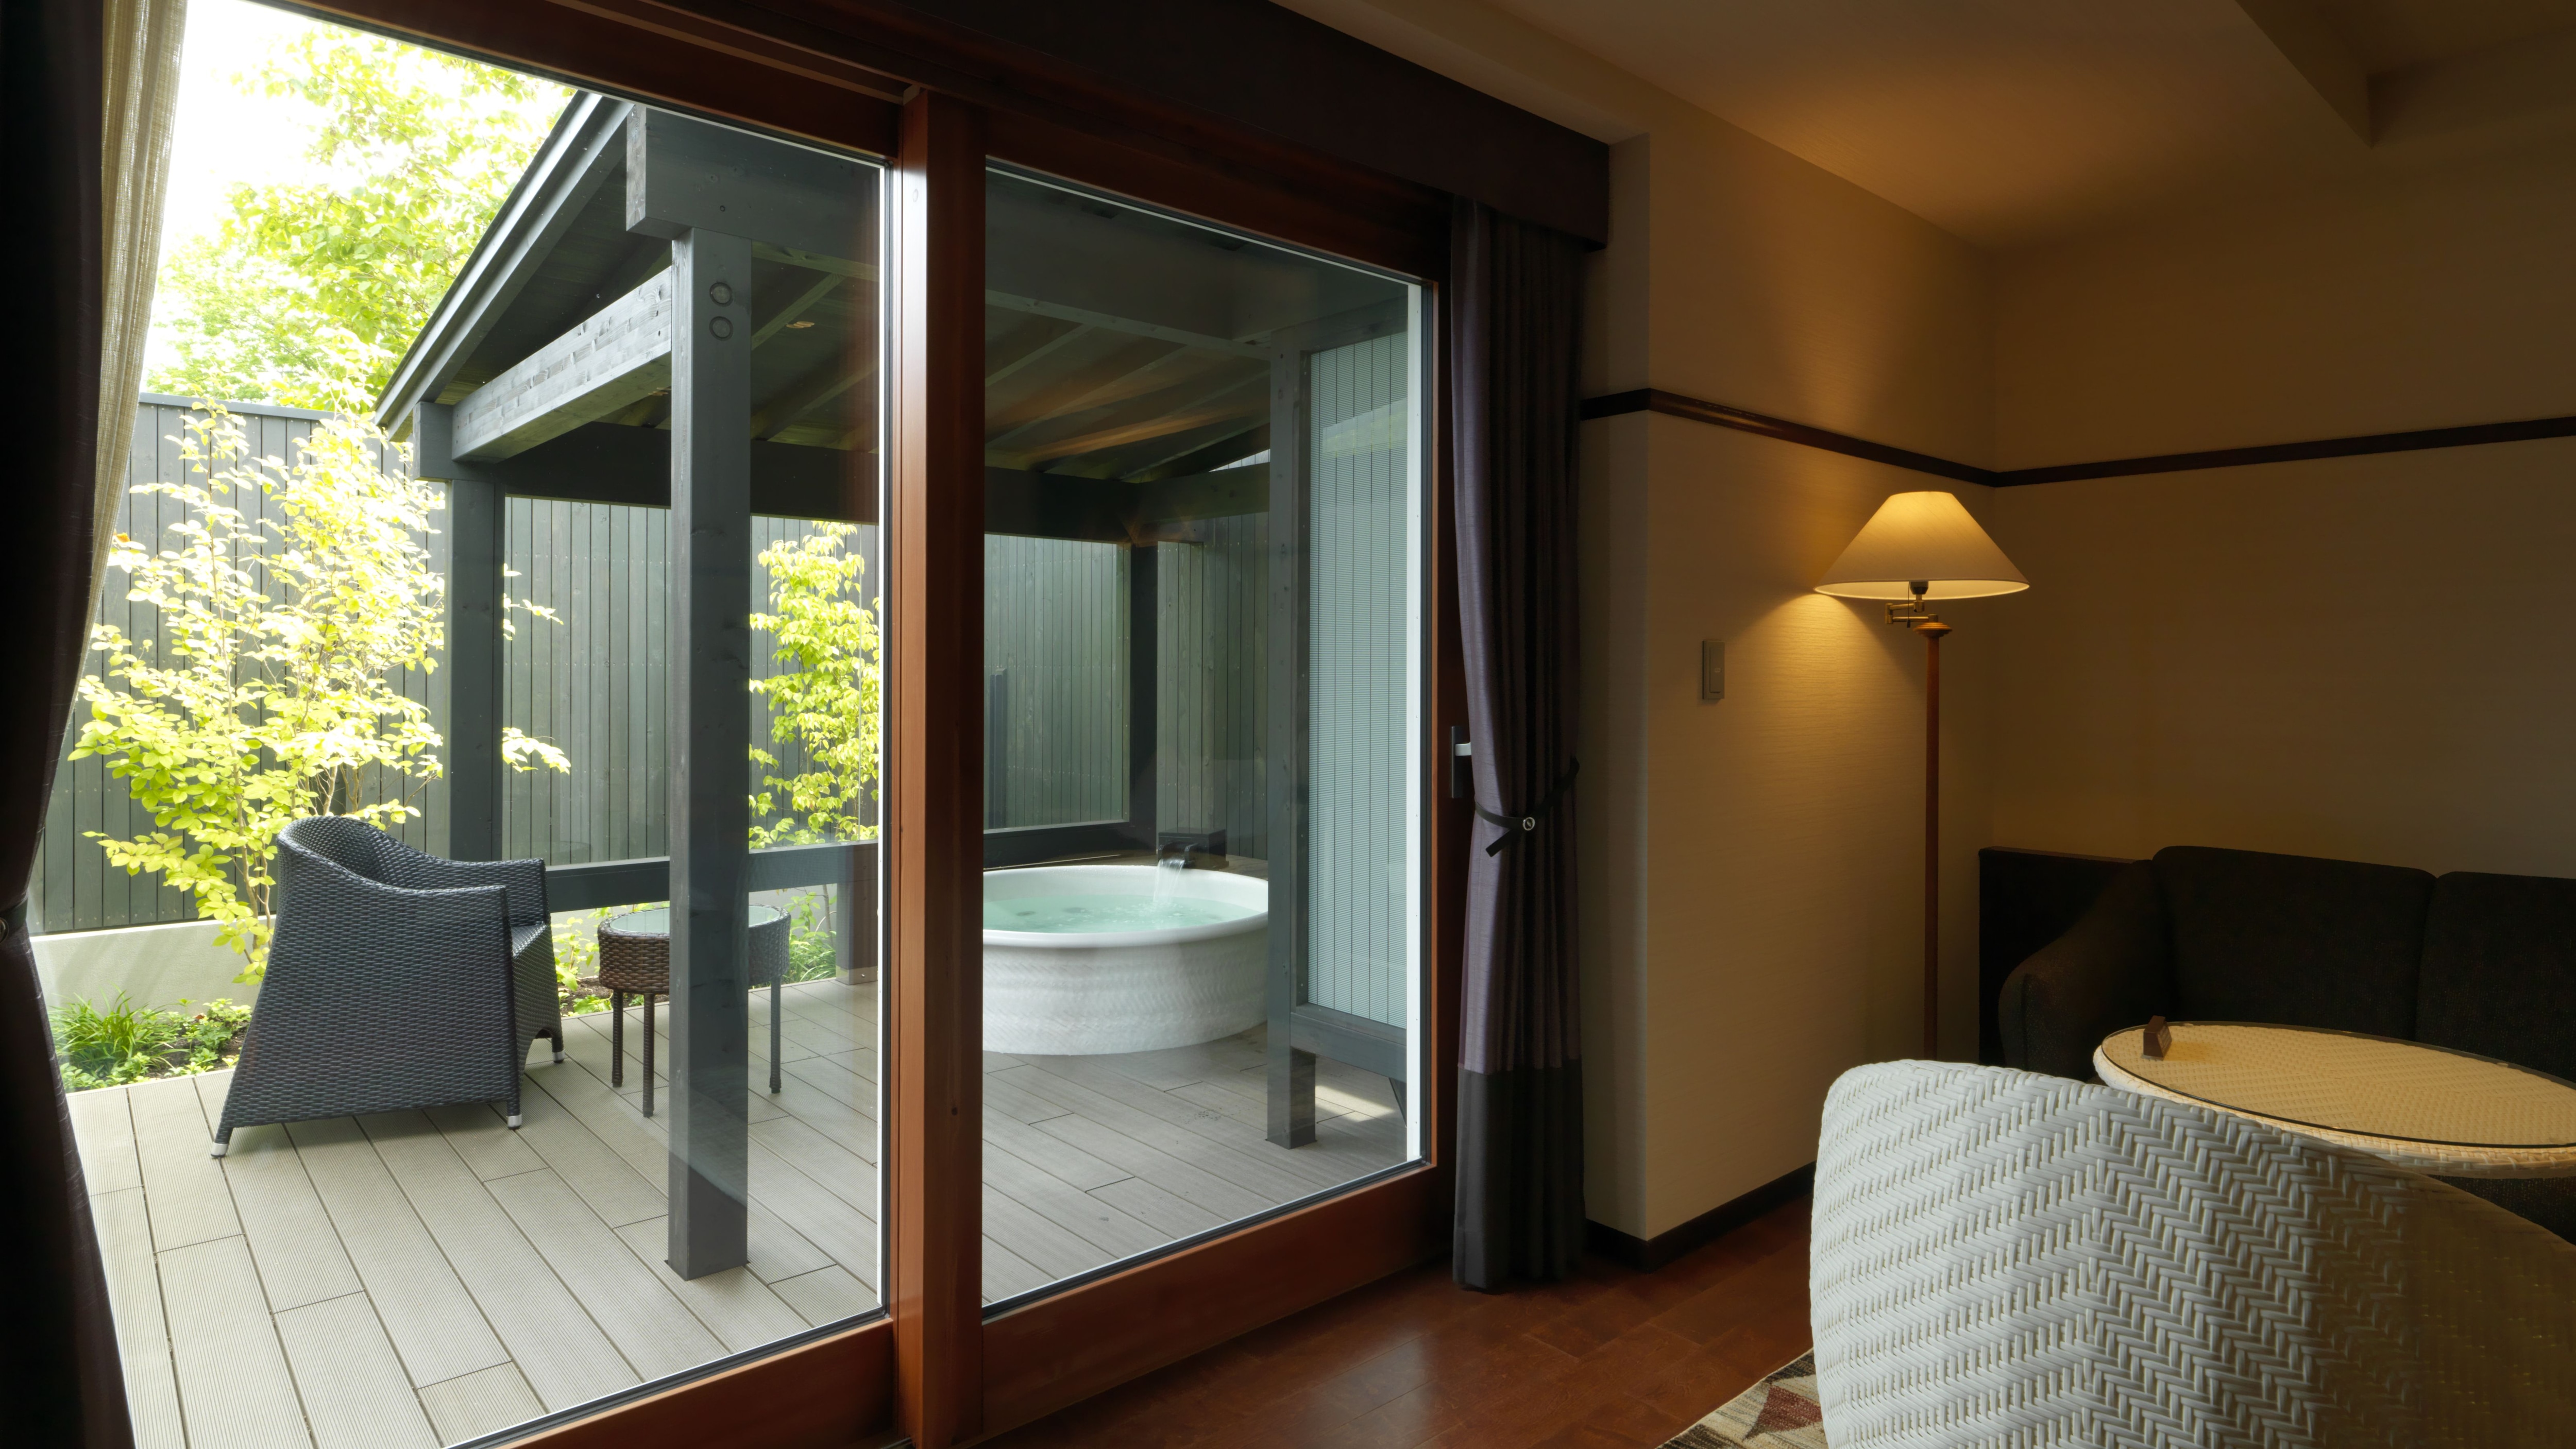 ◆ Twin room with open-air bath / Private space where you can fully enjoy the bath (example of guest room)